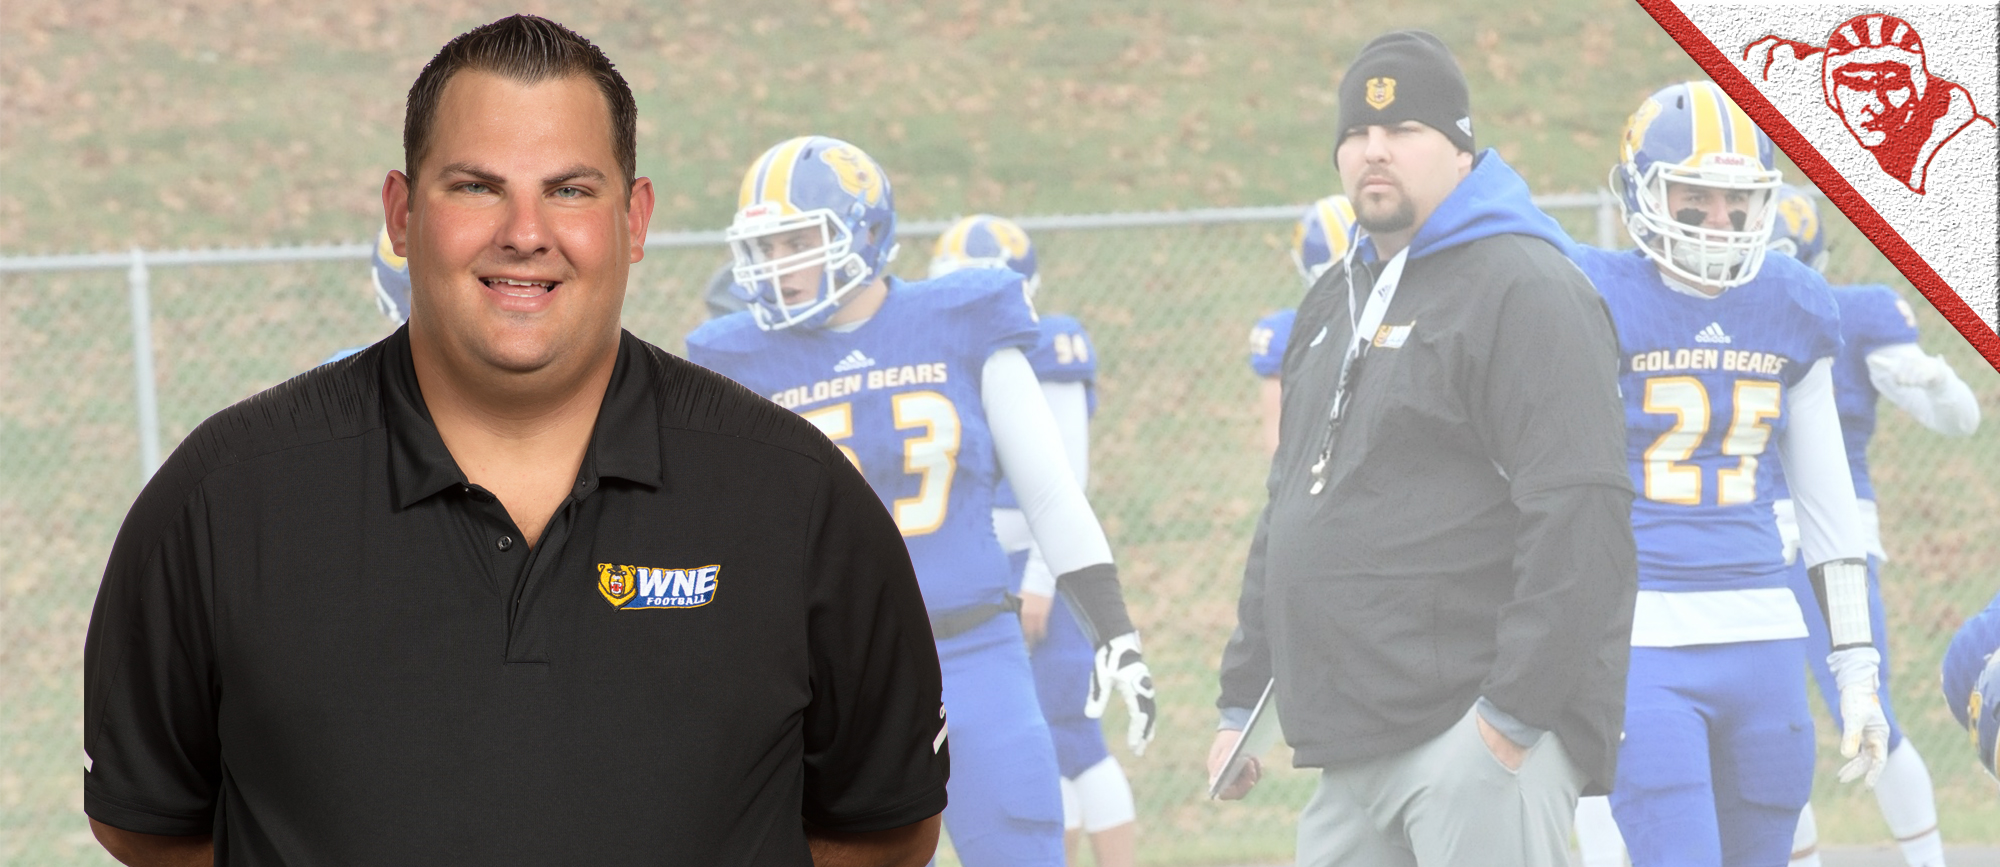 Alex Bresner Named DII/DIII Assistant Coach of the Year by Gridiron Club of Greater Boston